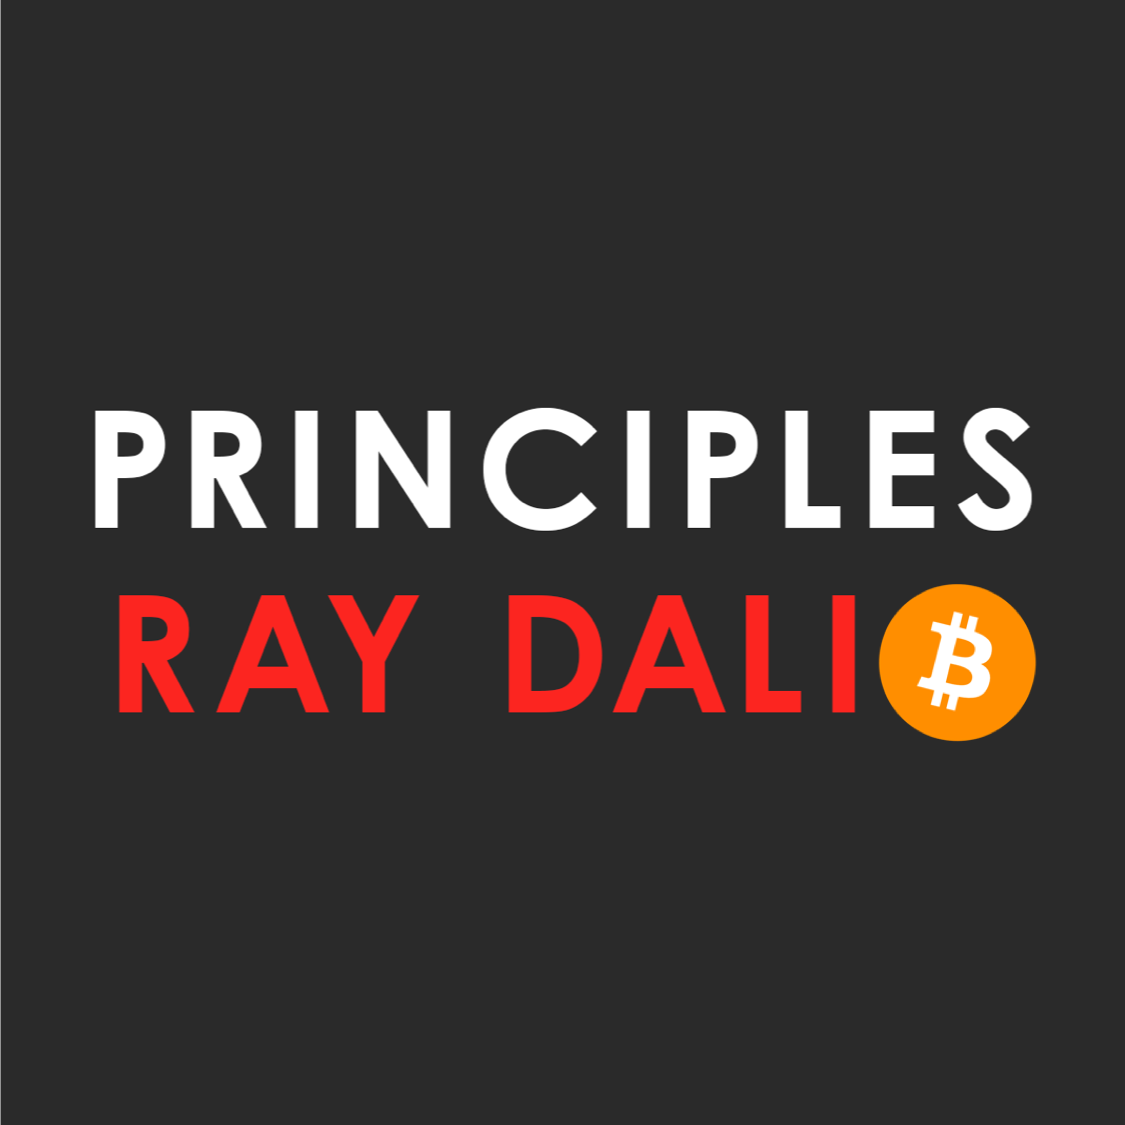 An Open Letter to Ray Dalio re: Bitcoin | by Robert Breedlove | Medium